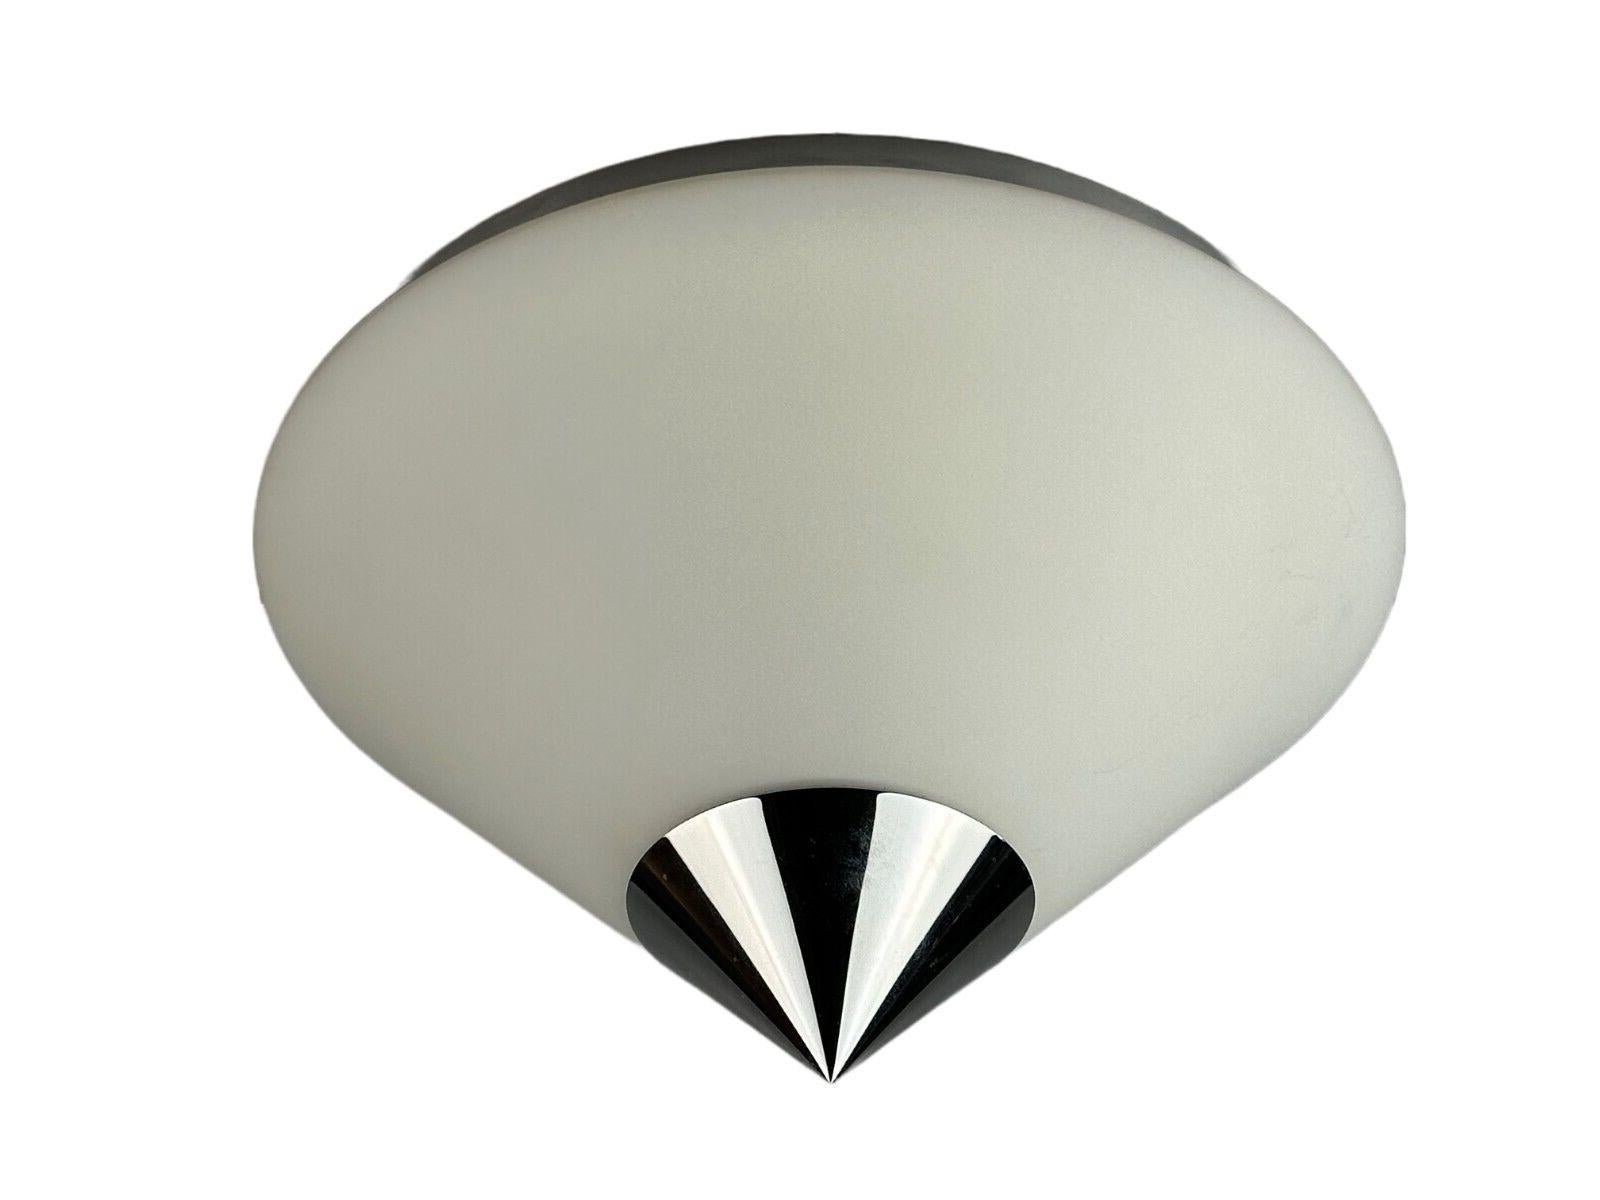 60s 70s ceiling lamp wall lamp by Limburg Leuchten Germany glass chrome

Object: wall lamp

Manufacturer: Glashütte Limburg

Condition: good

Age: around 1960-1970

Material: glass, metal, chrome

Dimensions:

Diameter = 30cm
Height = 18cm

Other